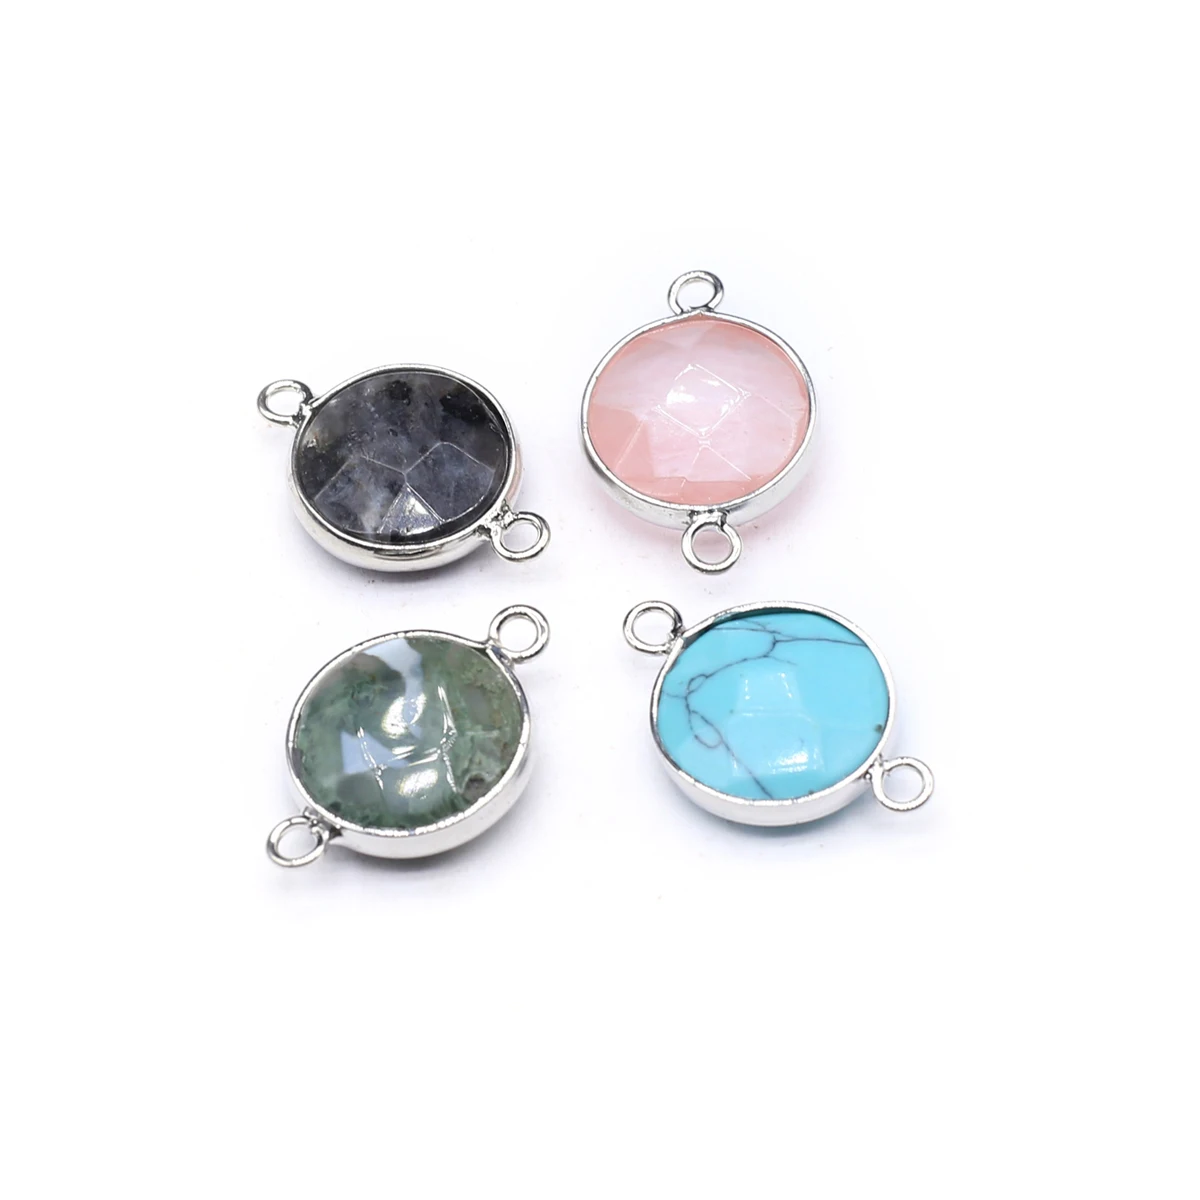 

10 Pcs Round Shape Random Faceted Healing Natural Crystal Stone Connectors Agate Pendant Charms for Making Jewelry Necklace Gift